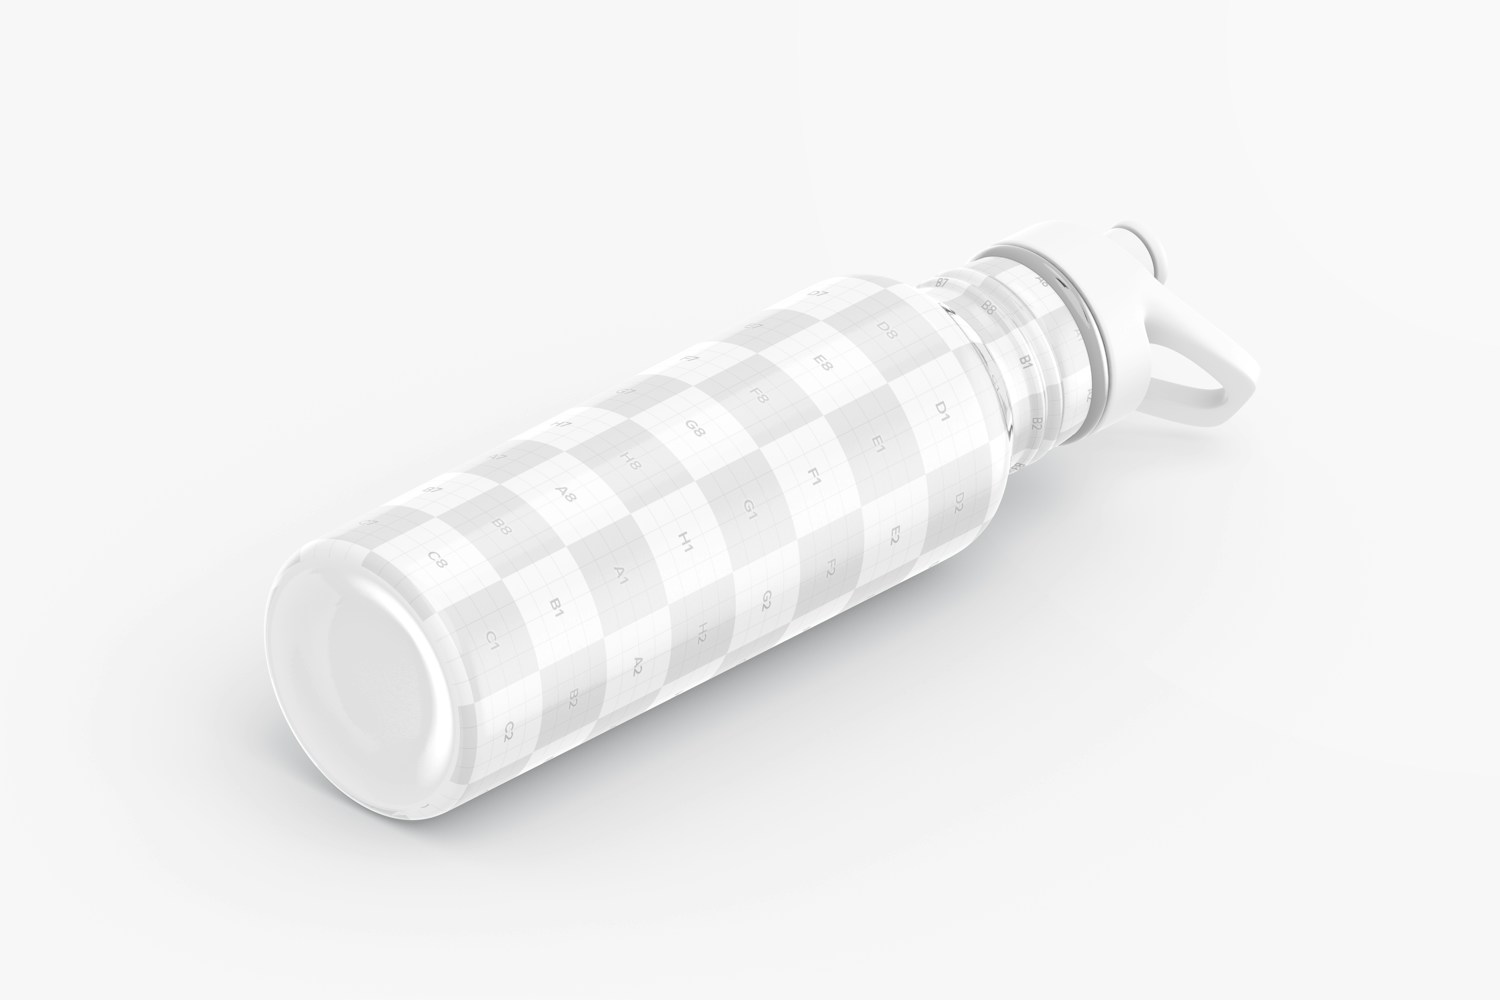 Bottle with Sport Cap Mockup, Isometric Right View